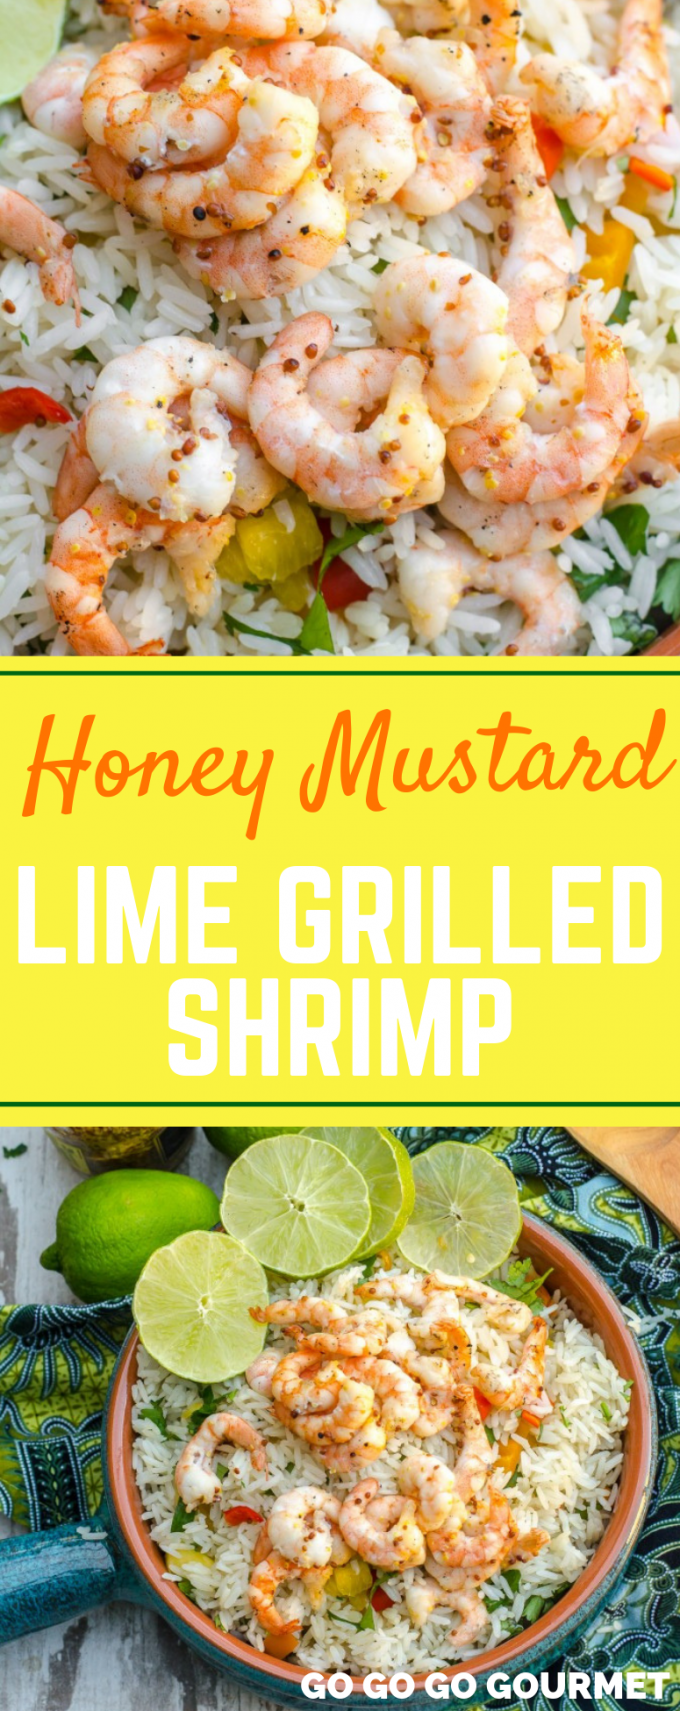 With a marinade of lime, mustard and honey, this Honey Mustard Lime Grilled Shrimp is one of the best easy shrimp recipes. Simply marinade, put them on skewers and throw them right on the grill! #gogogogourmet #honeymustardlimegrilledshrimp #grilledshrimp #limegrilledshrimp #easyshrimprecipes via @gogogogourmet